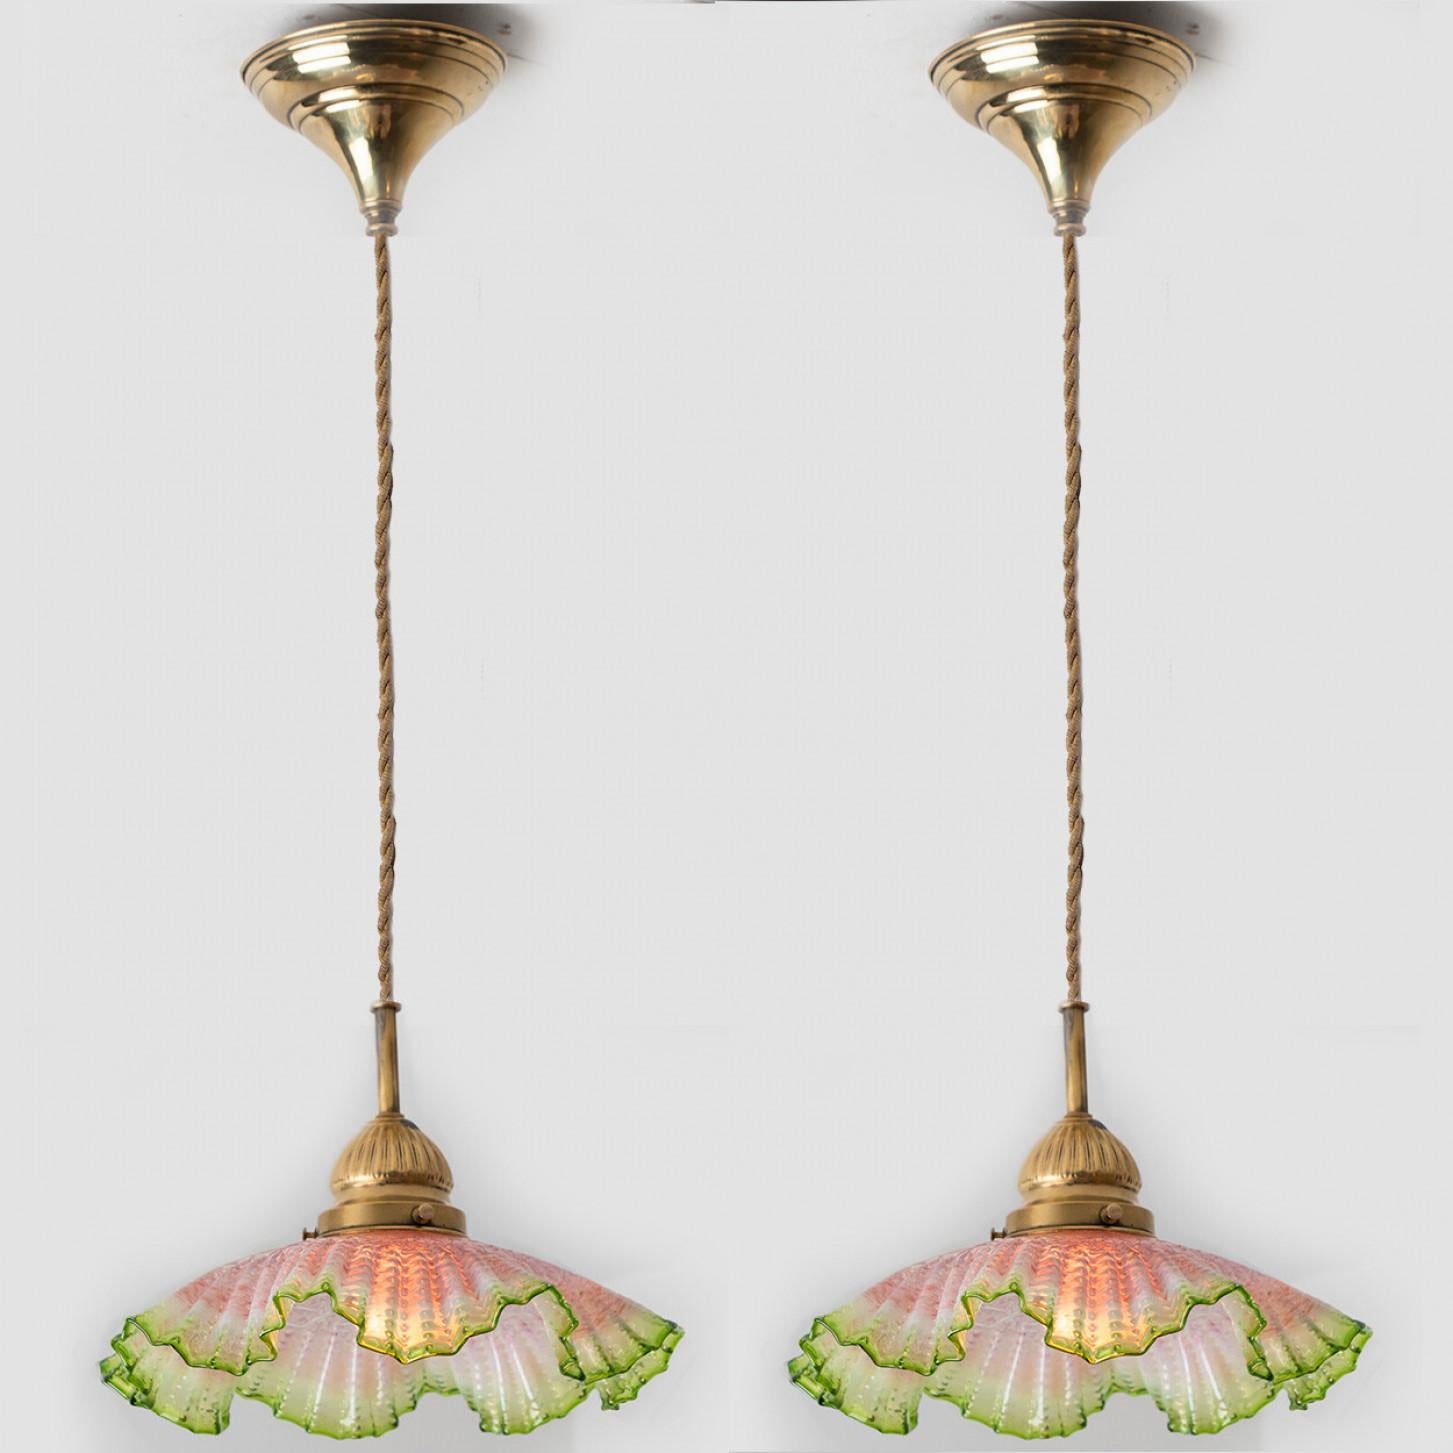 Pair of Art Deco Green Pink Skirt-shaped Glass and Brass Pendant Lights, 1930 For Sale 4